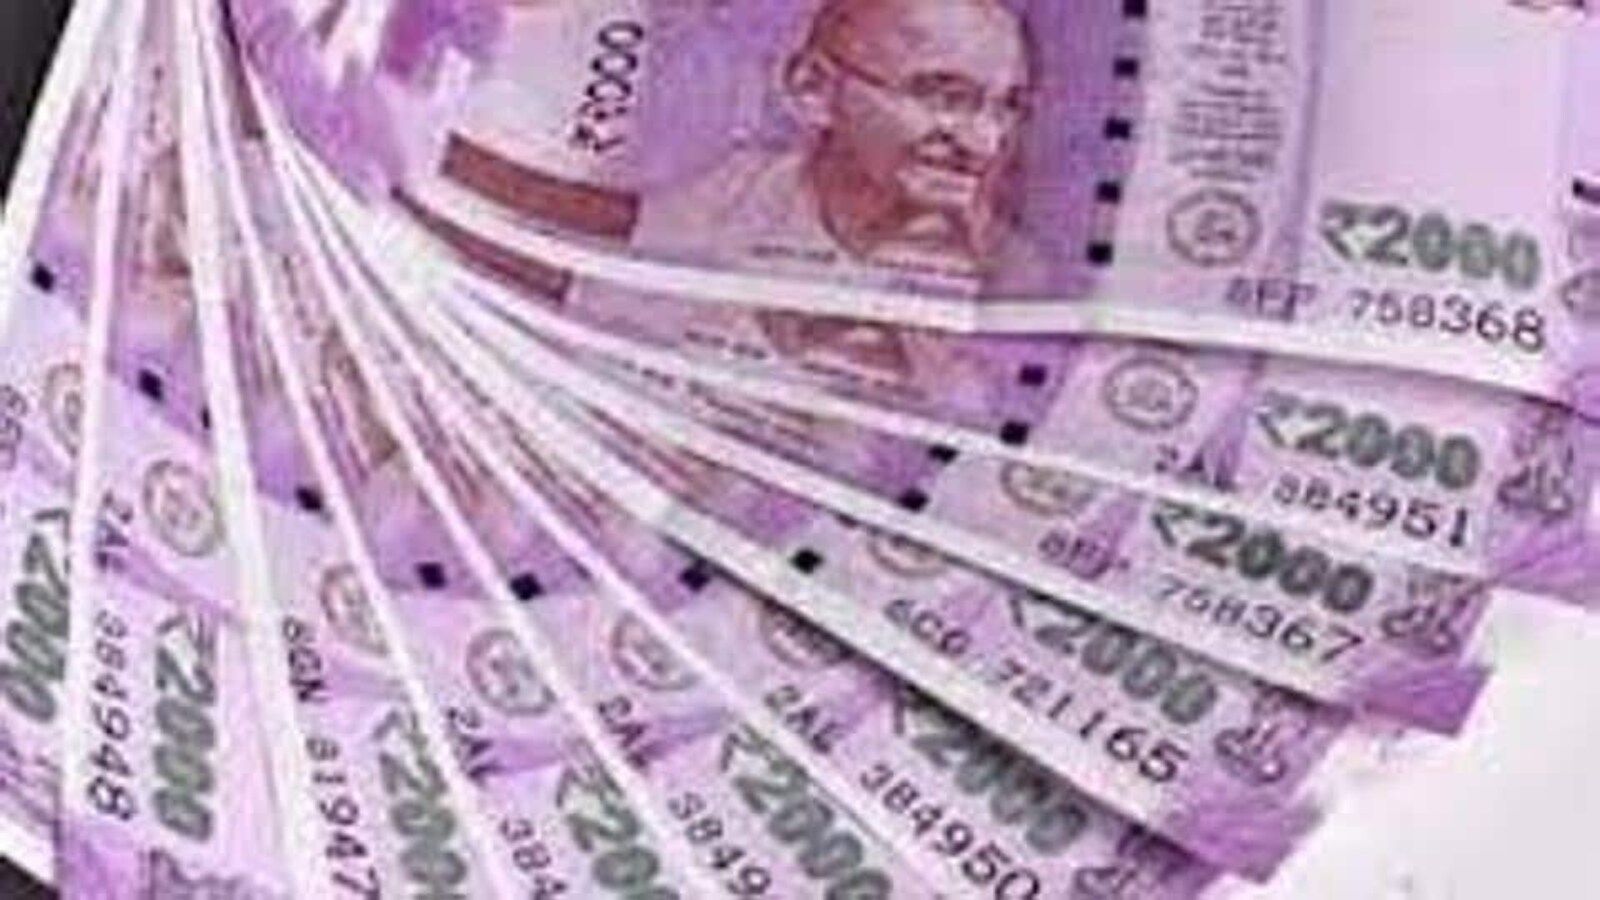 7th pay commission: 3% hike in Dearness Allowance for central govt employees